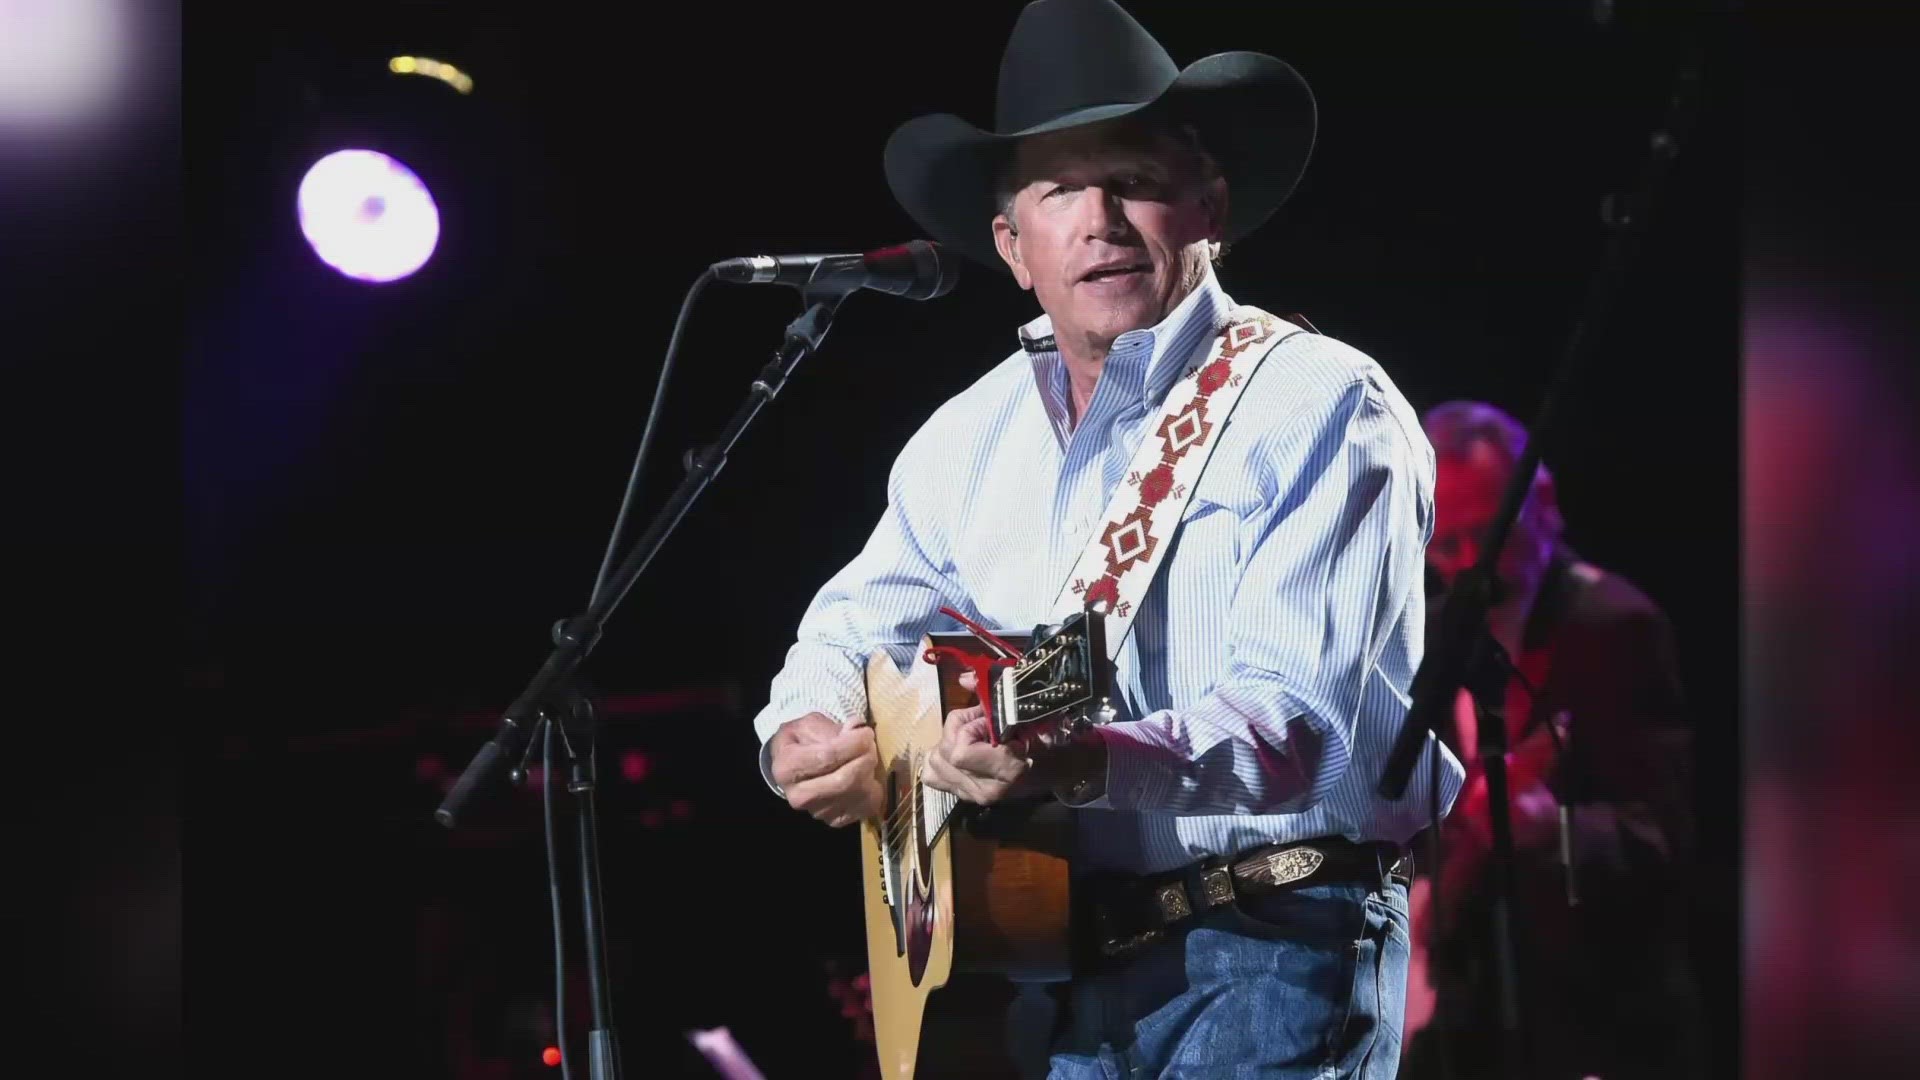 Strait will feel right at home at Dickies, where he was among the first performers to play the venue when it opened in 2019.